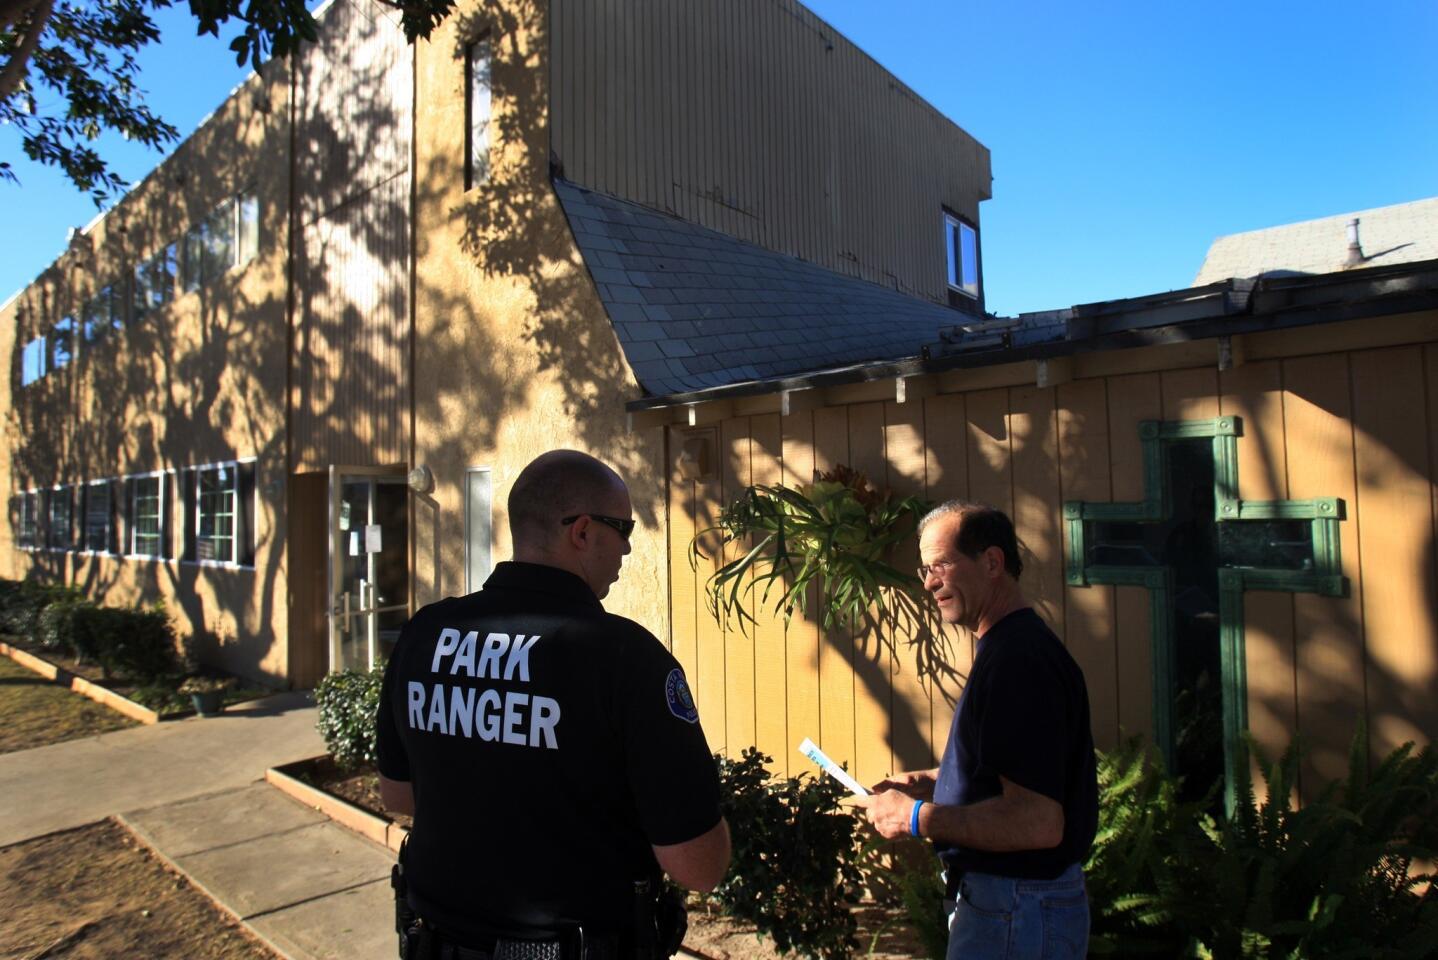 Costa Mesa Park Ranger M. Pallo greets and hands out a flier to Peter K., who is formerly homeless and now works and lives at the Lighthouse Outreach Church in Costa Mesa.